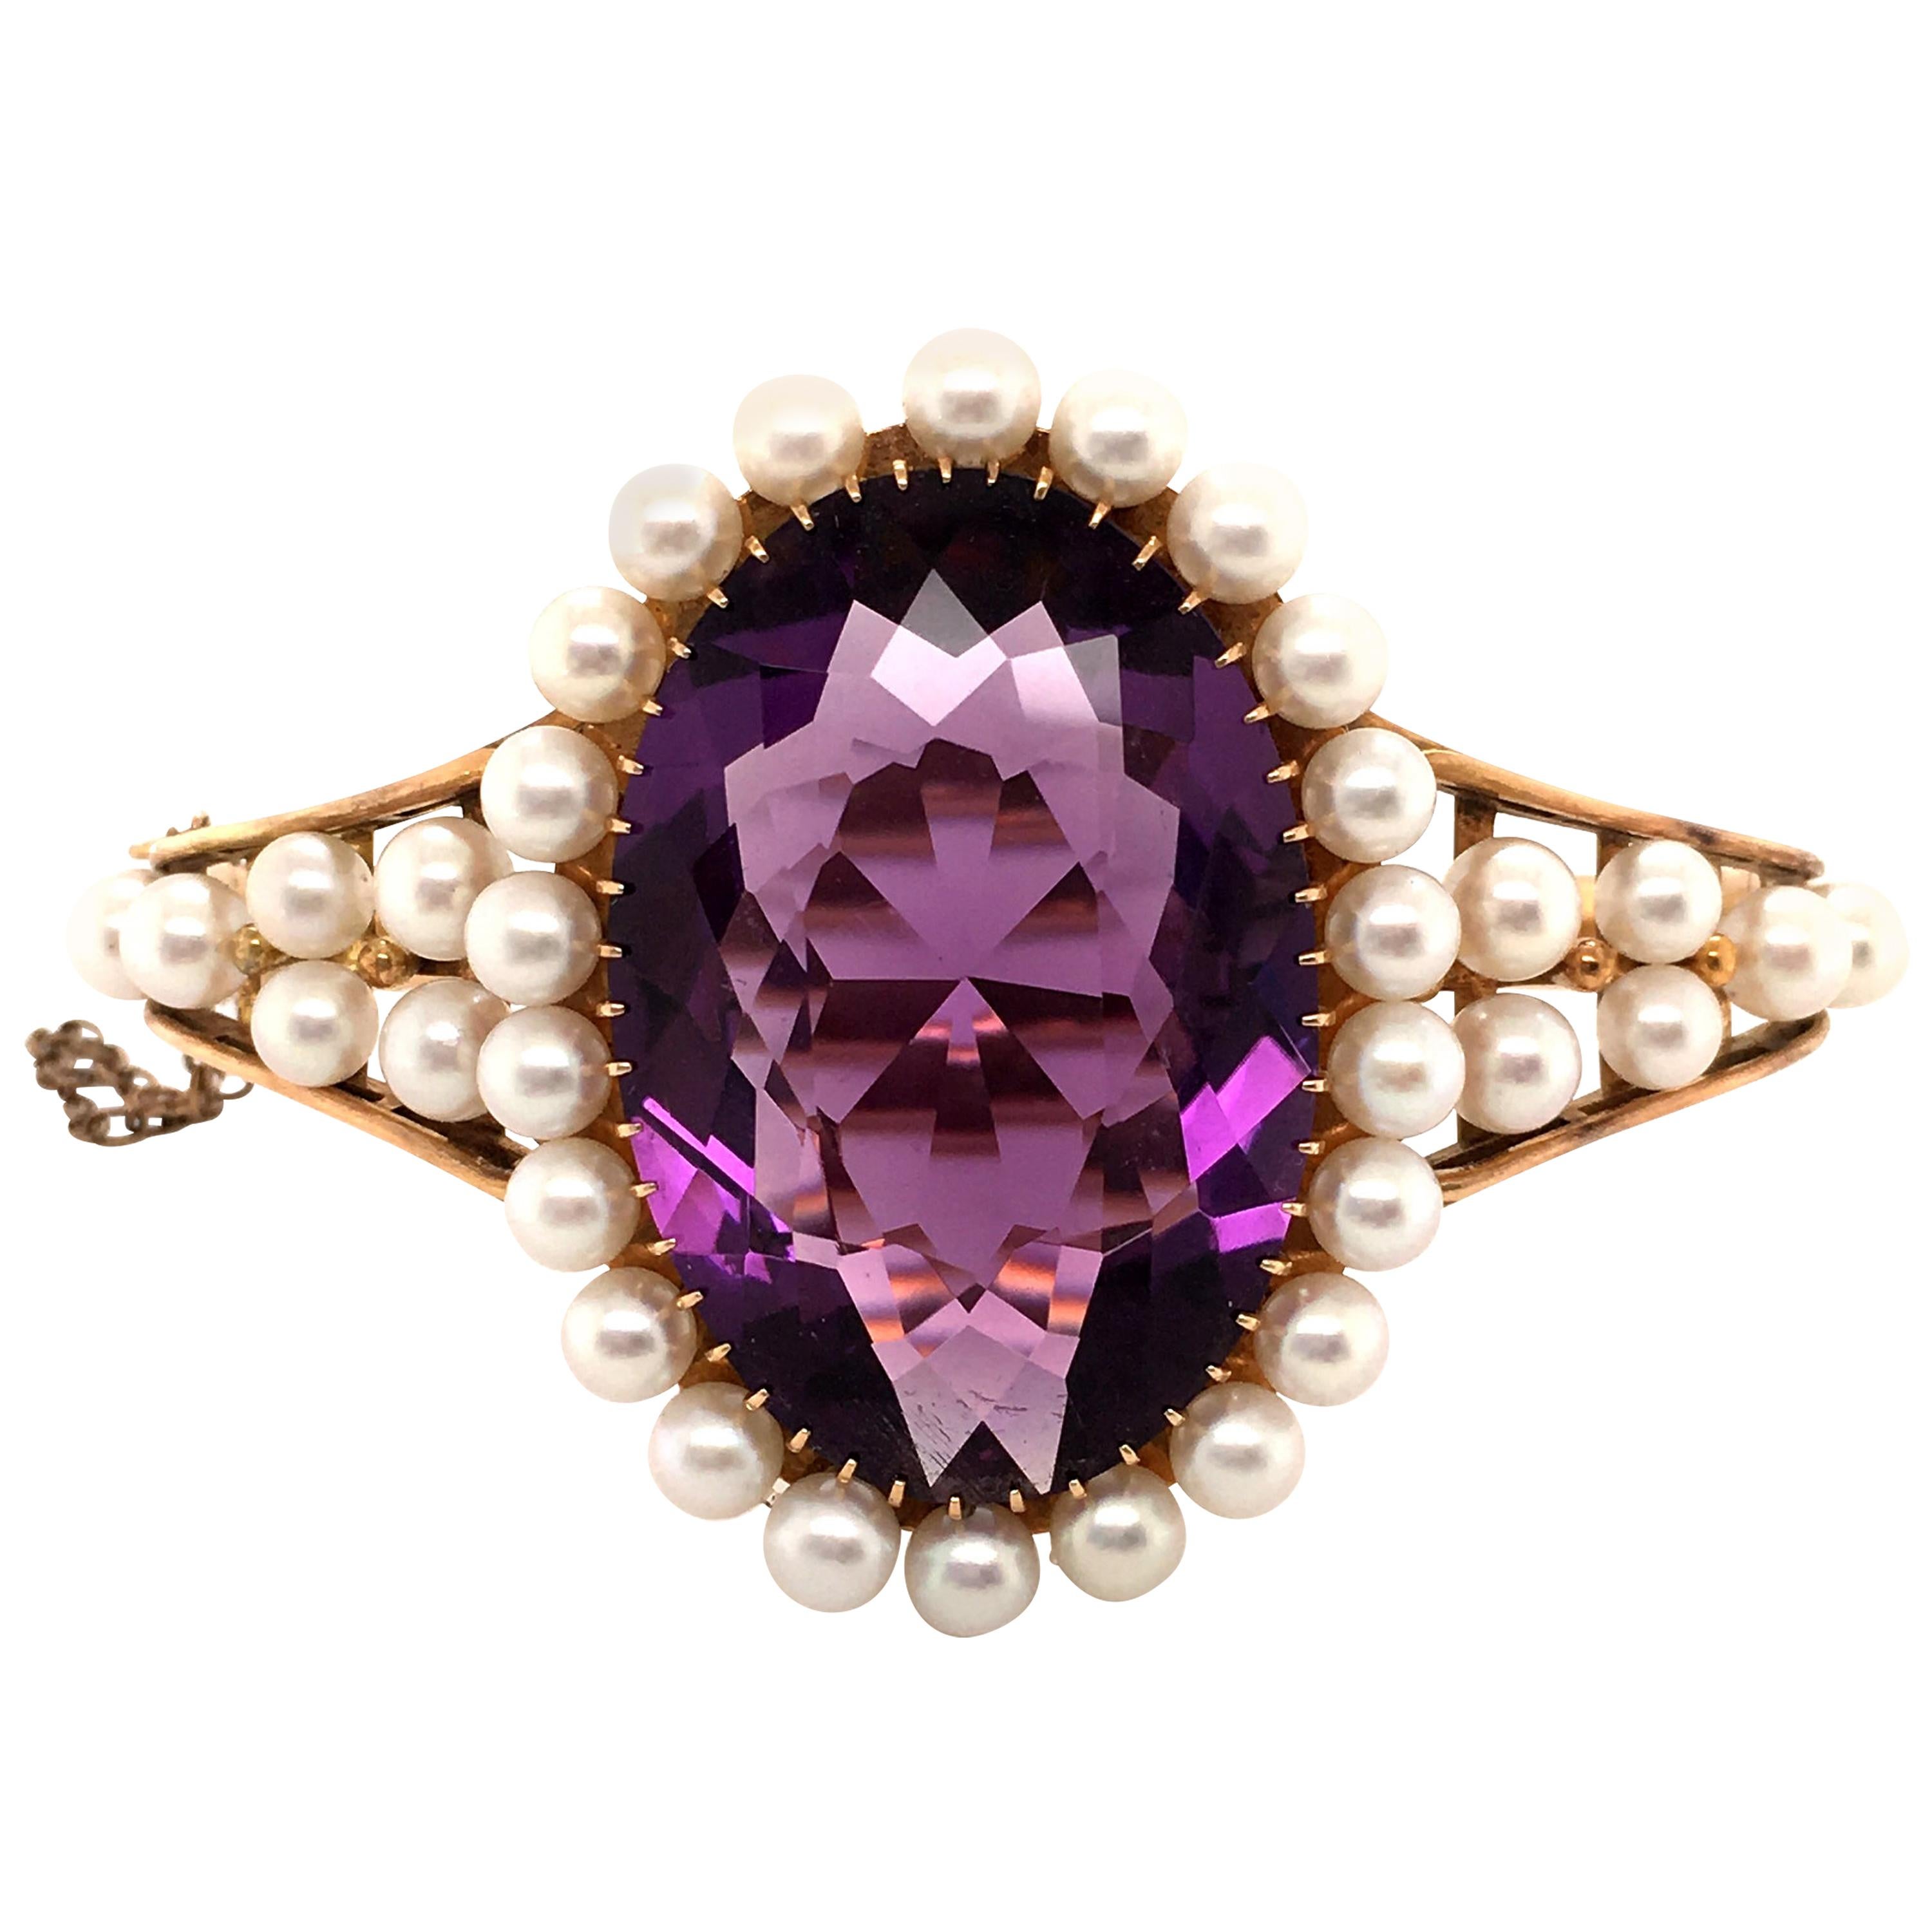 Antique Amethyst and Pearl Bangle in 18 Karat Gold